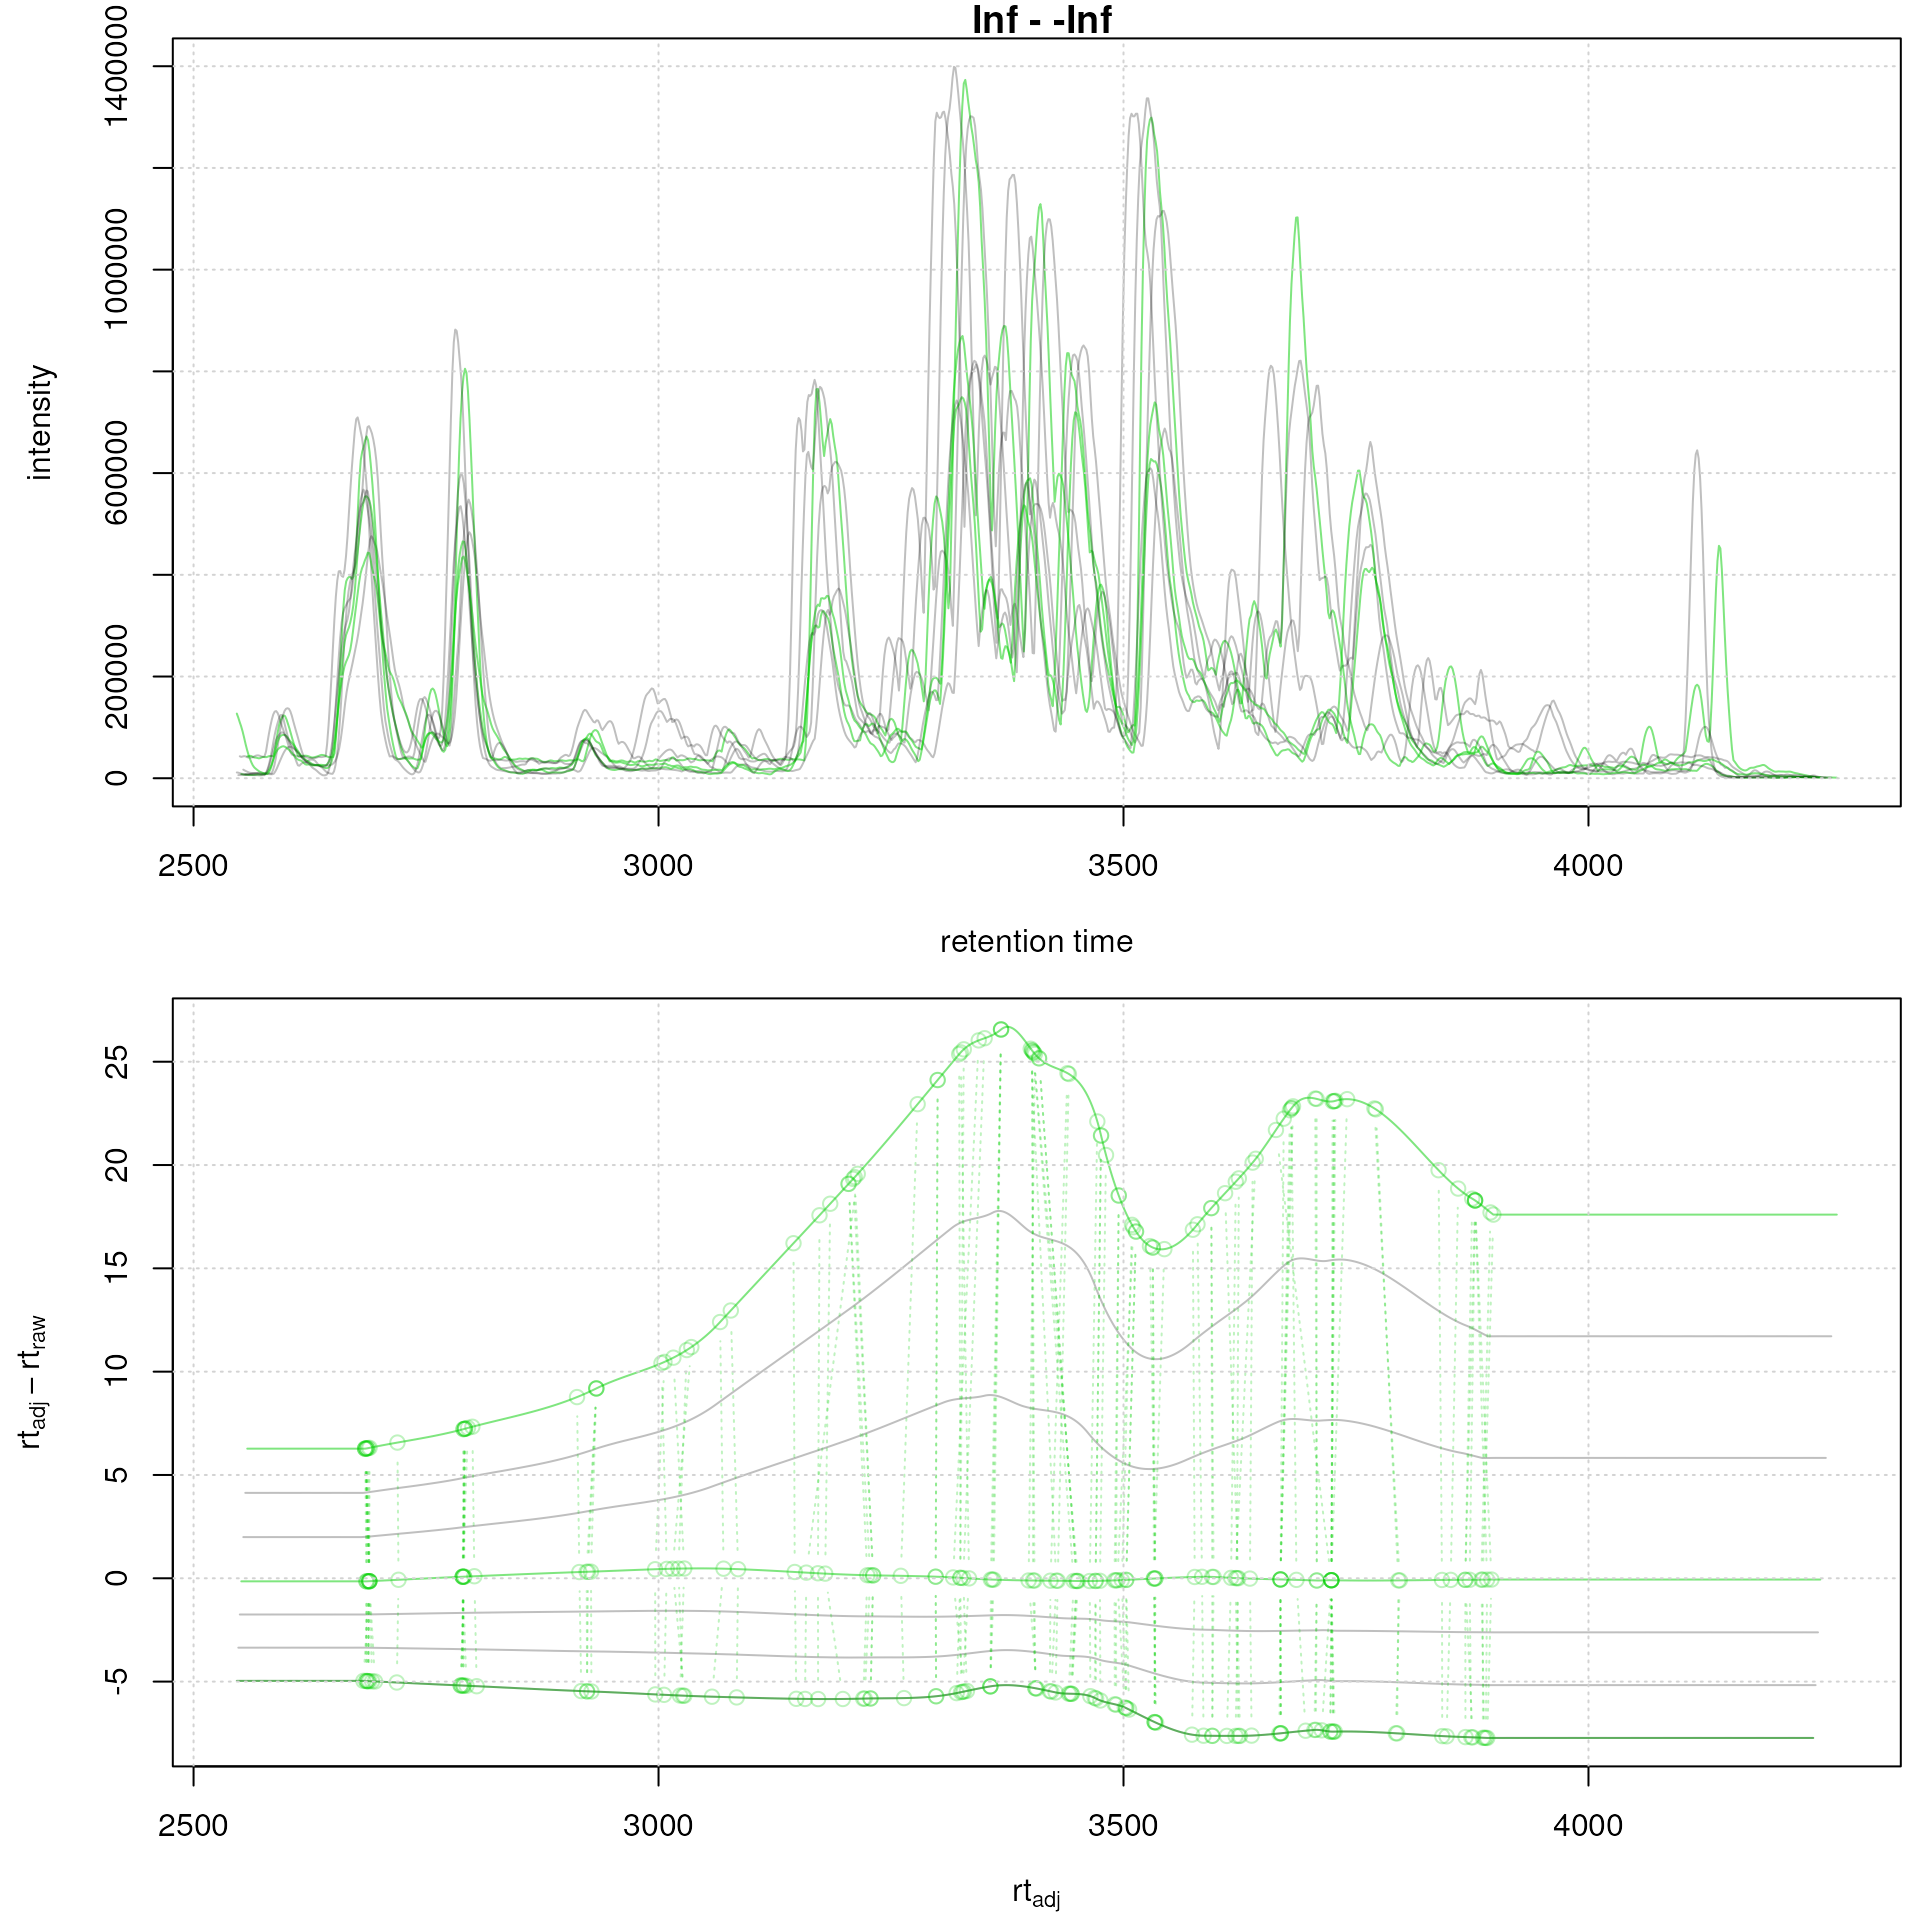 Subset-alignment results with option average. Difference between adjusted and raw retention times along the retention time axis. Samples on which the alignment models were estimated are shown in green, study samples in grey.